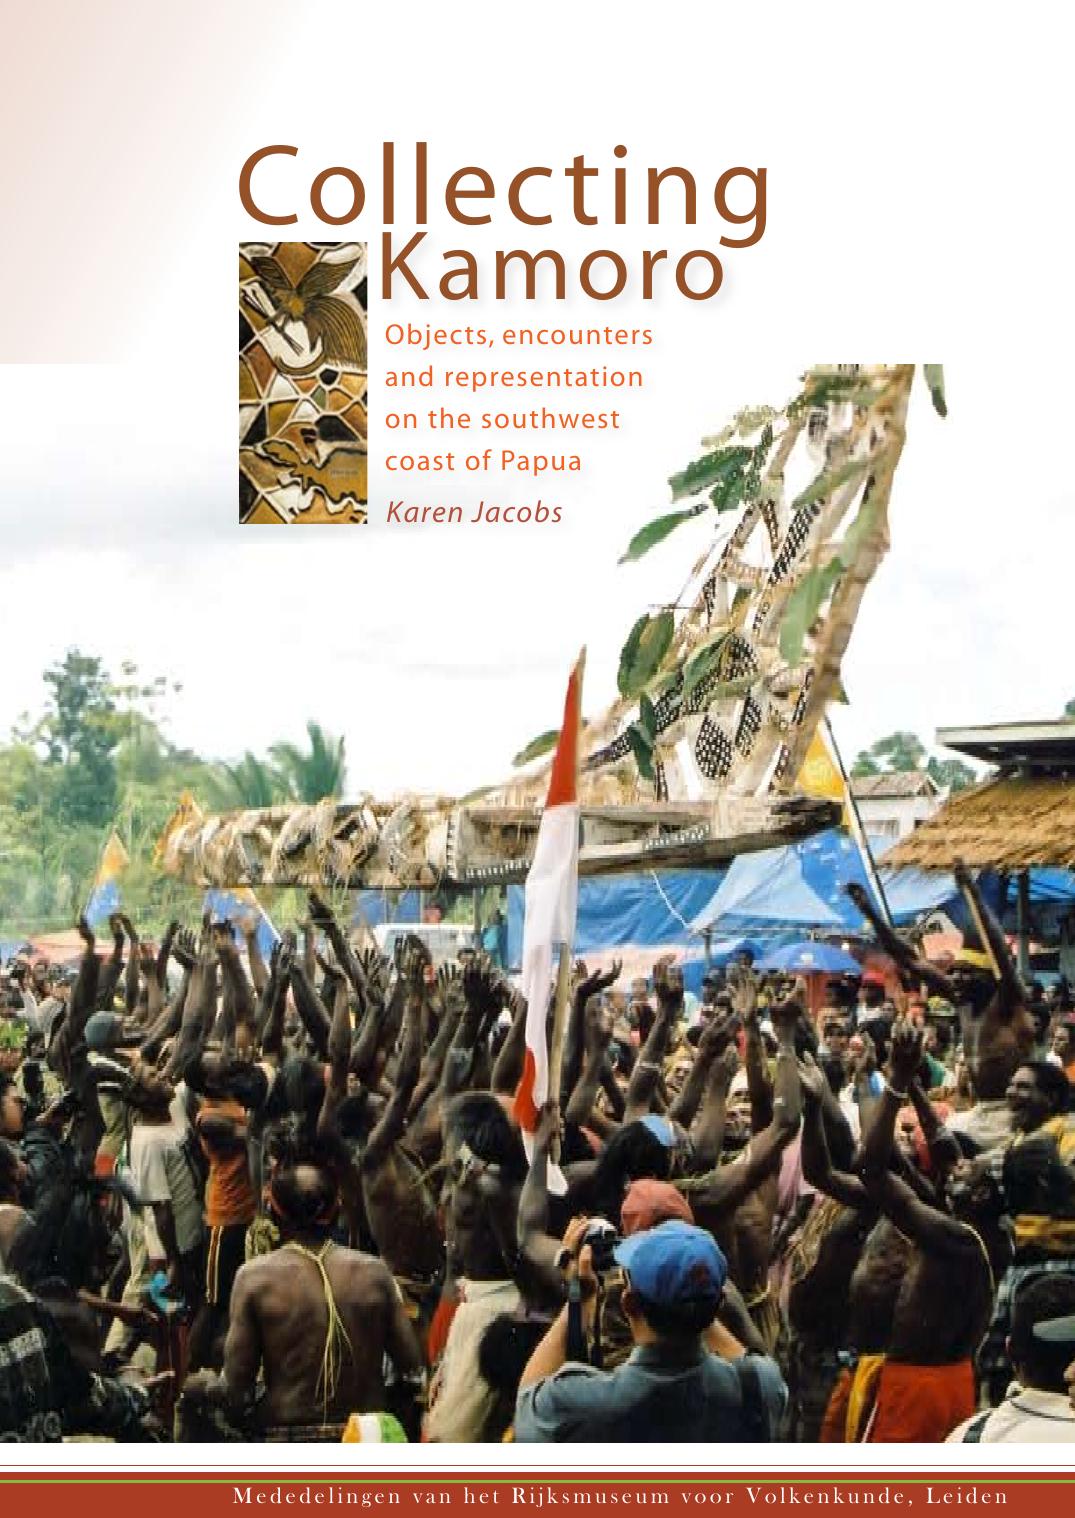 Collecting Kamoro: Objects, encounters and representation on the southwest coast of Papua by Karen Jacobs